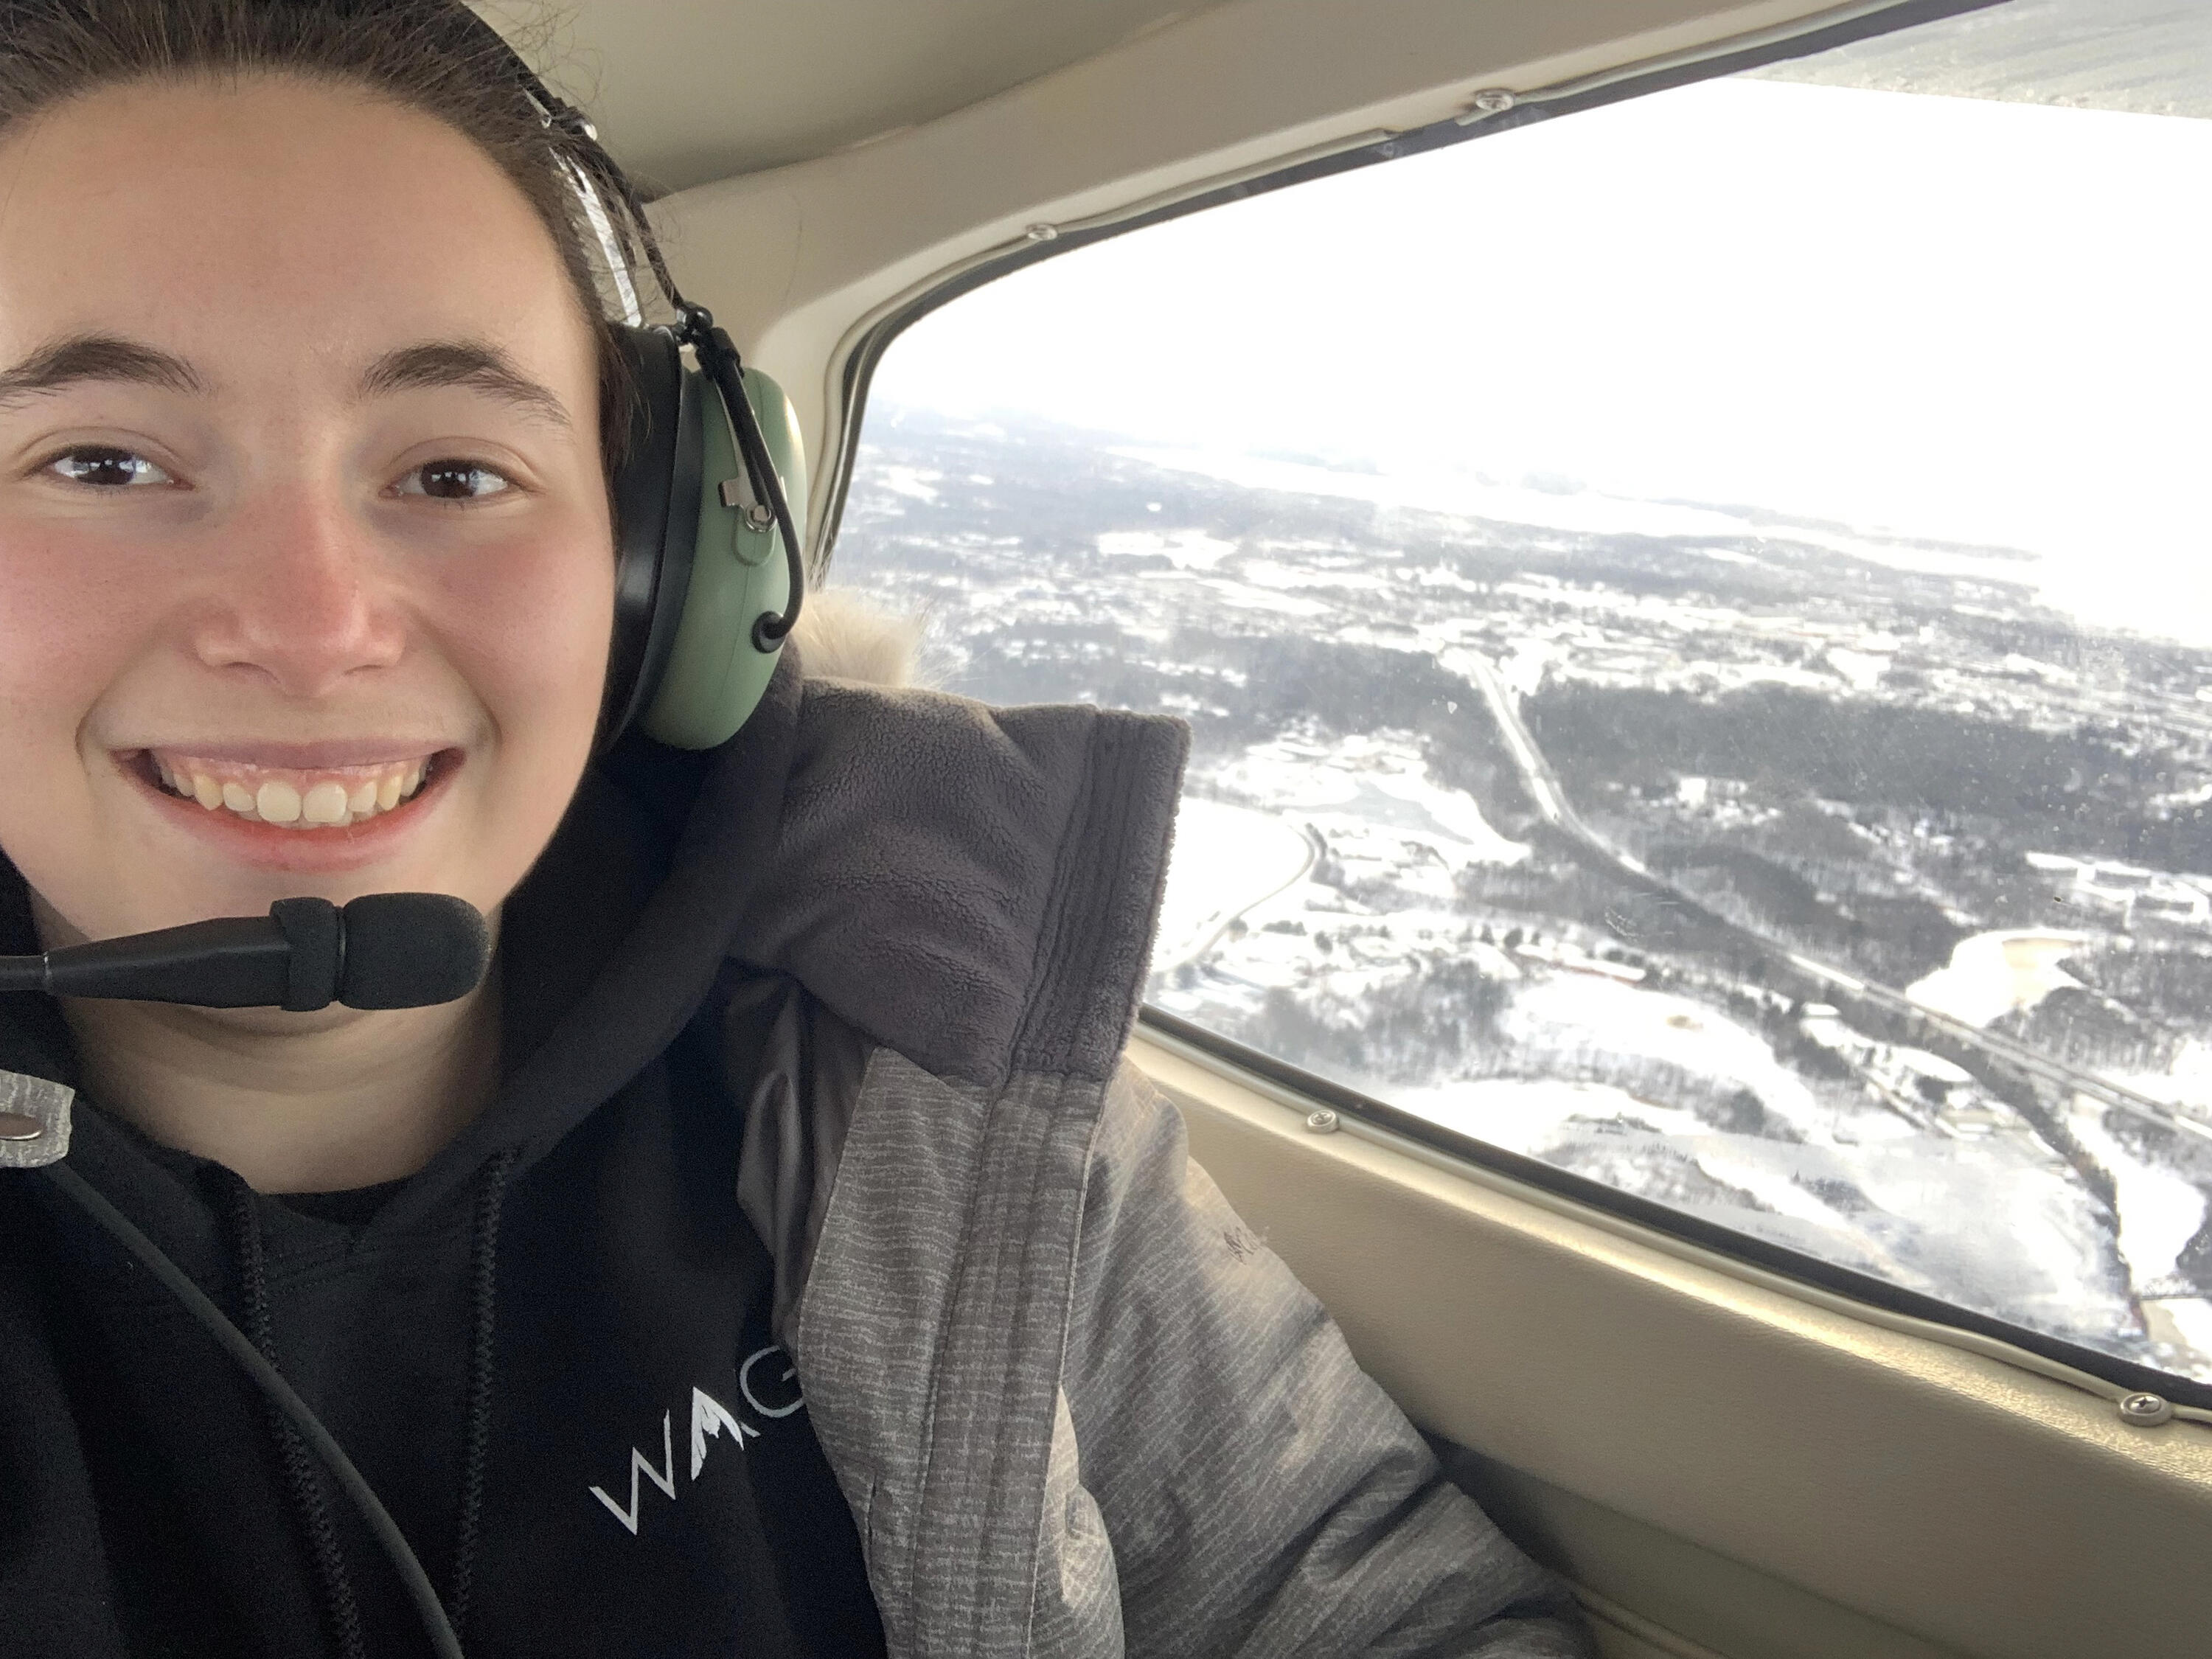 Brielle in a small airborne plan. Smiling with a headset on.